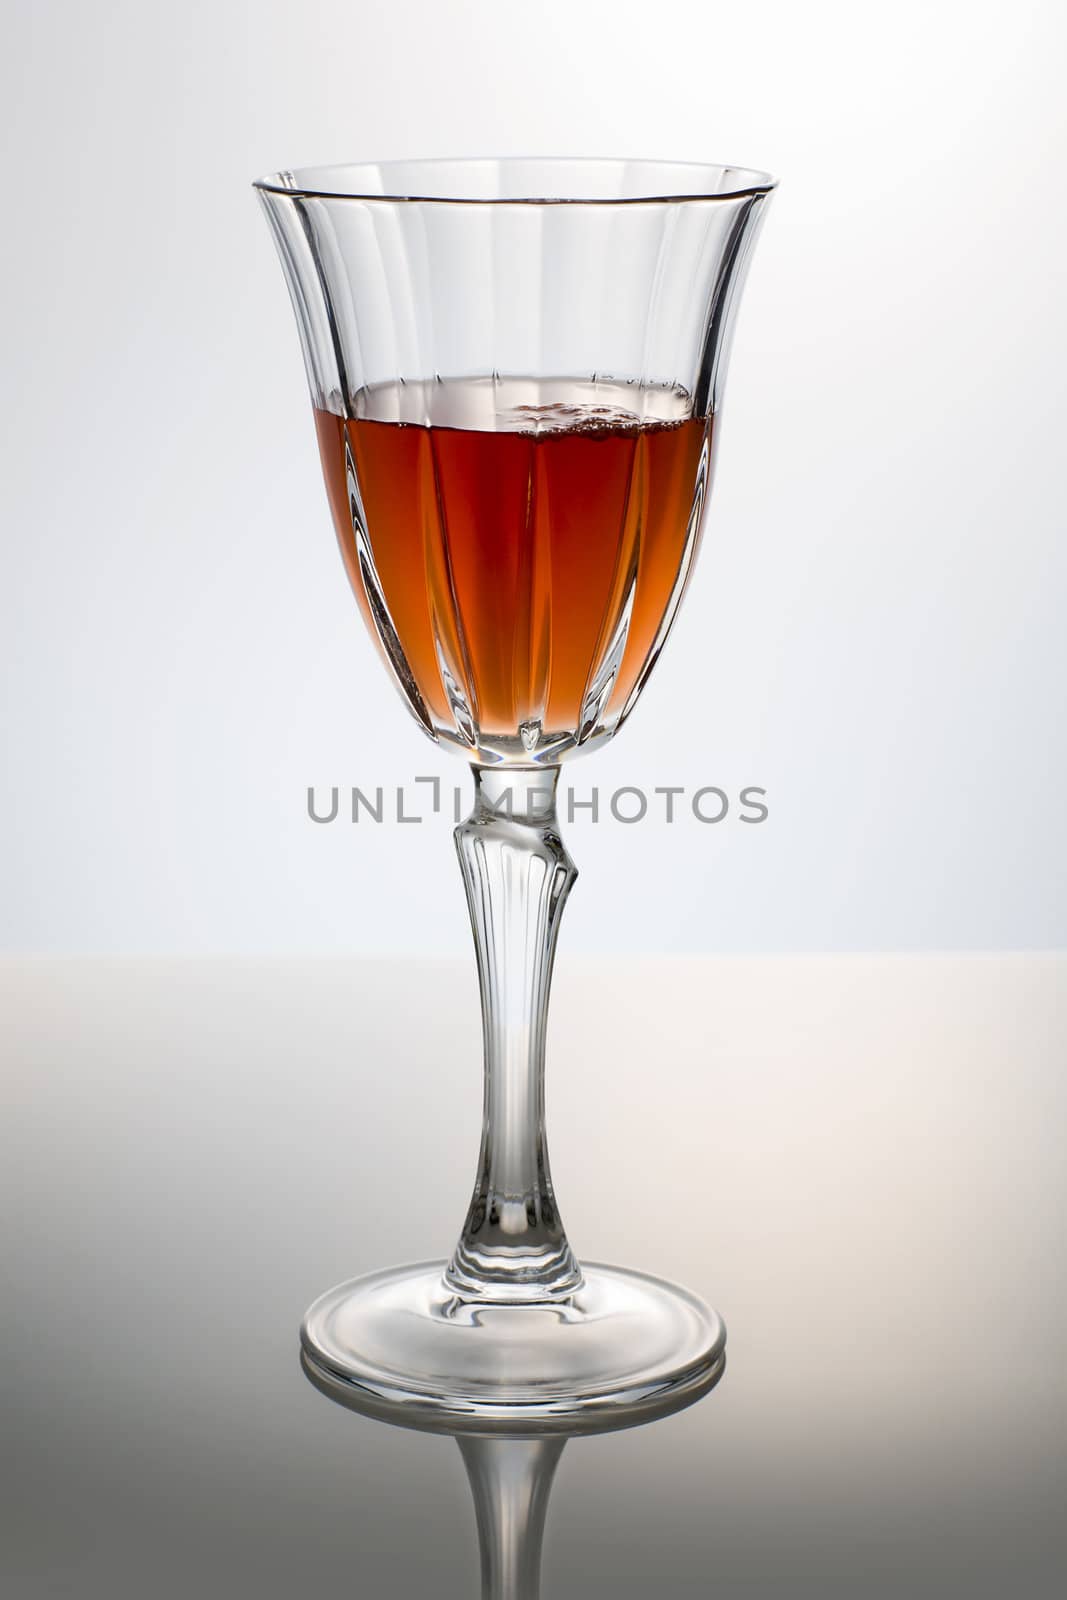 classic red wine glass over a light background